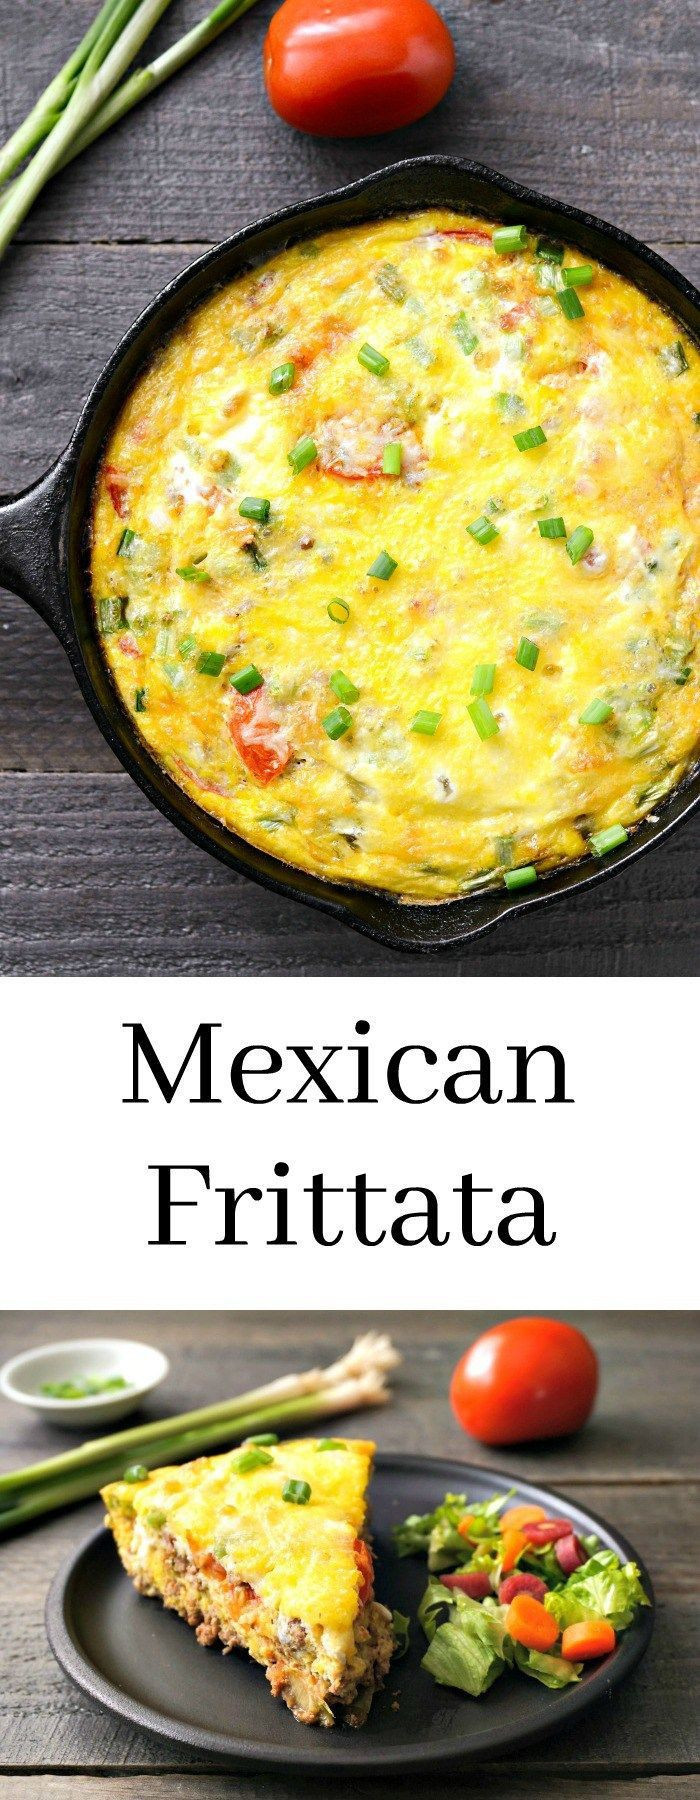 Mexican Brunch Recipes
 The 30 Best Ideas for Mexican Brunch Recipes Best Round